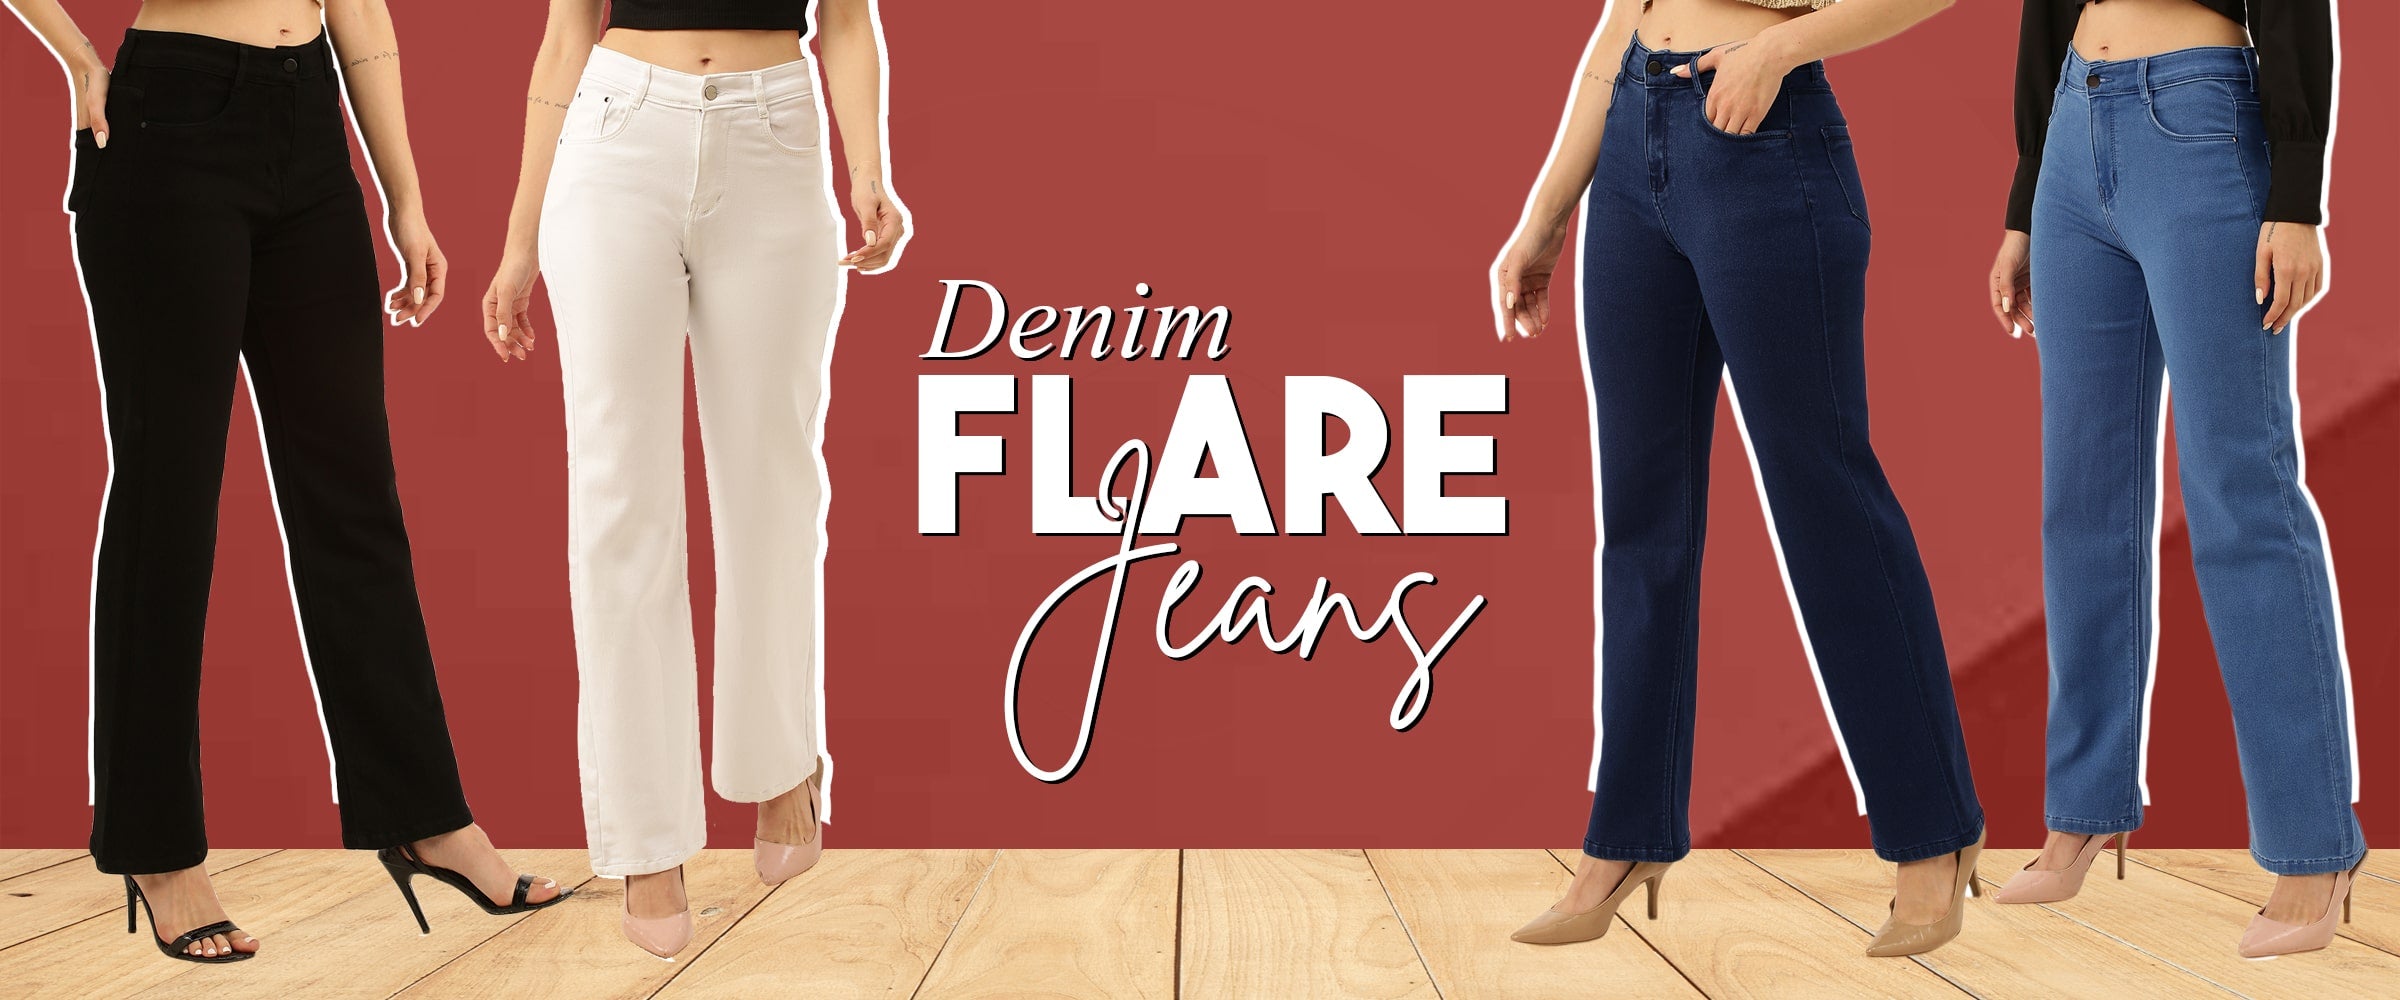 Plus Size Bell Bottoms 